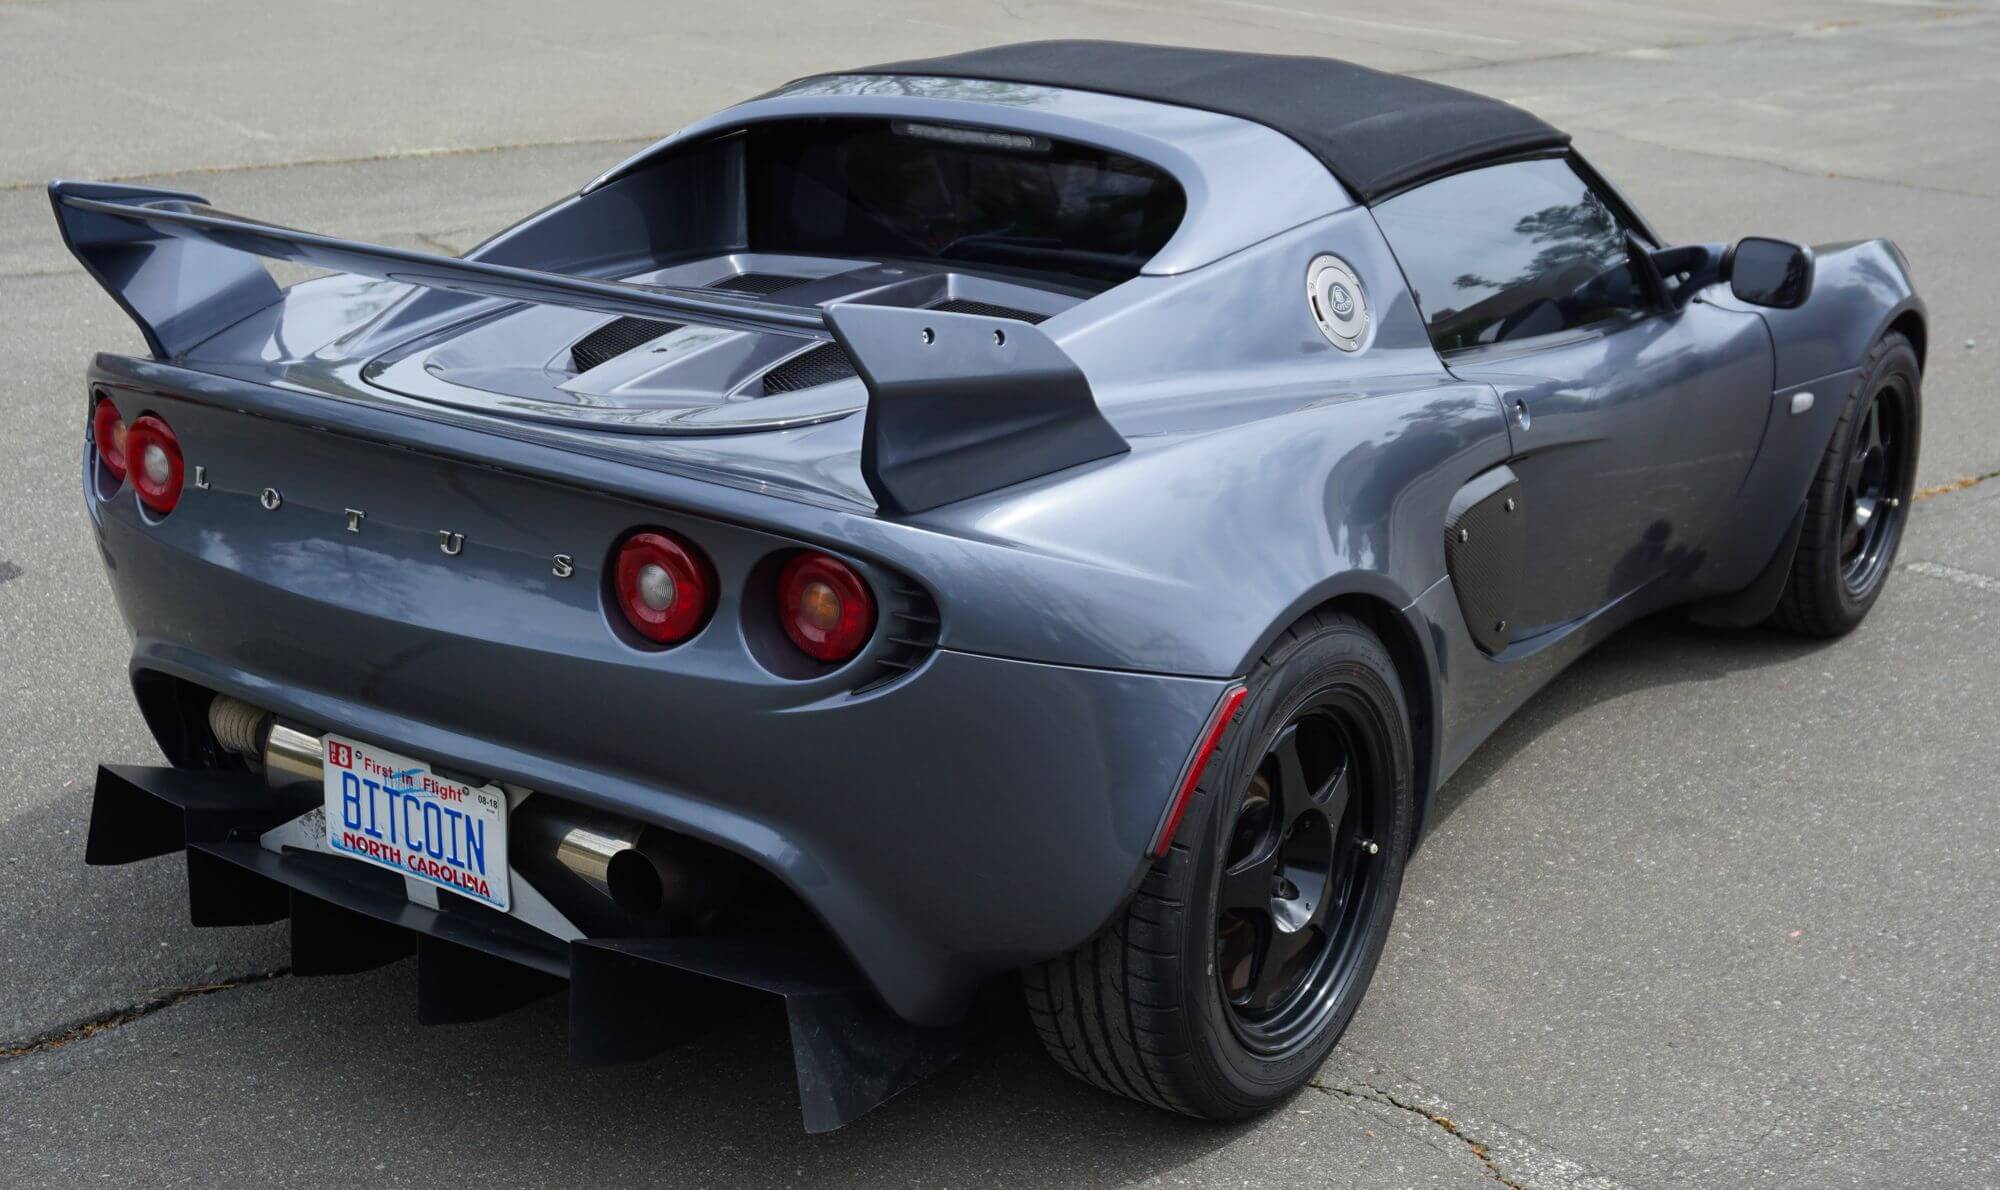 Lotus-with-bitcoin-license-plate